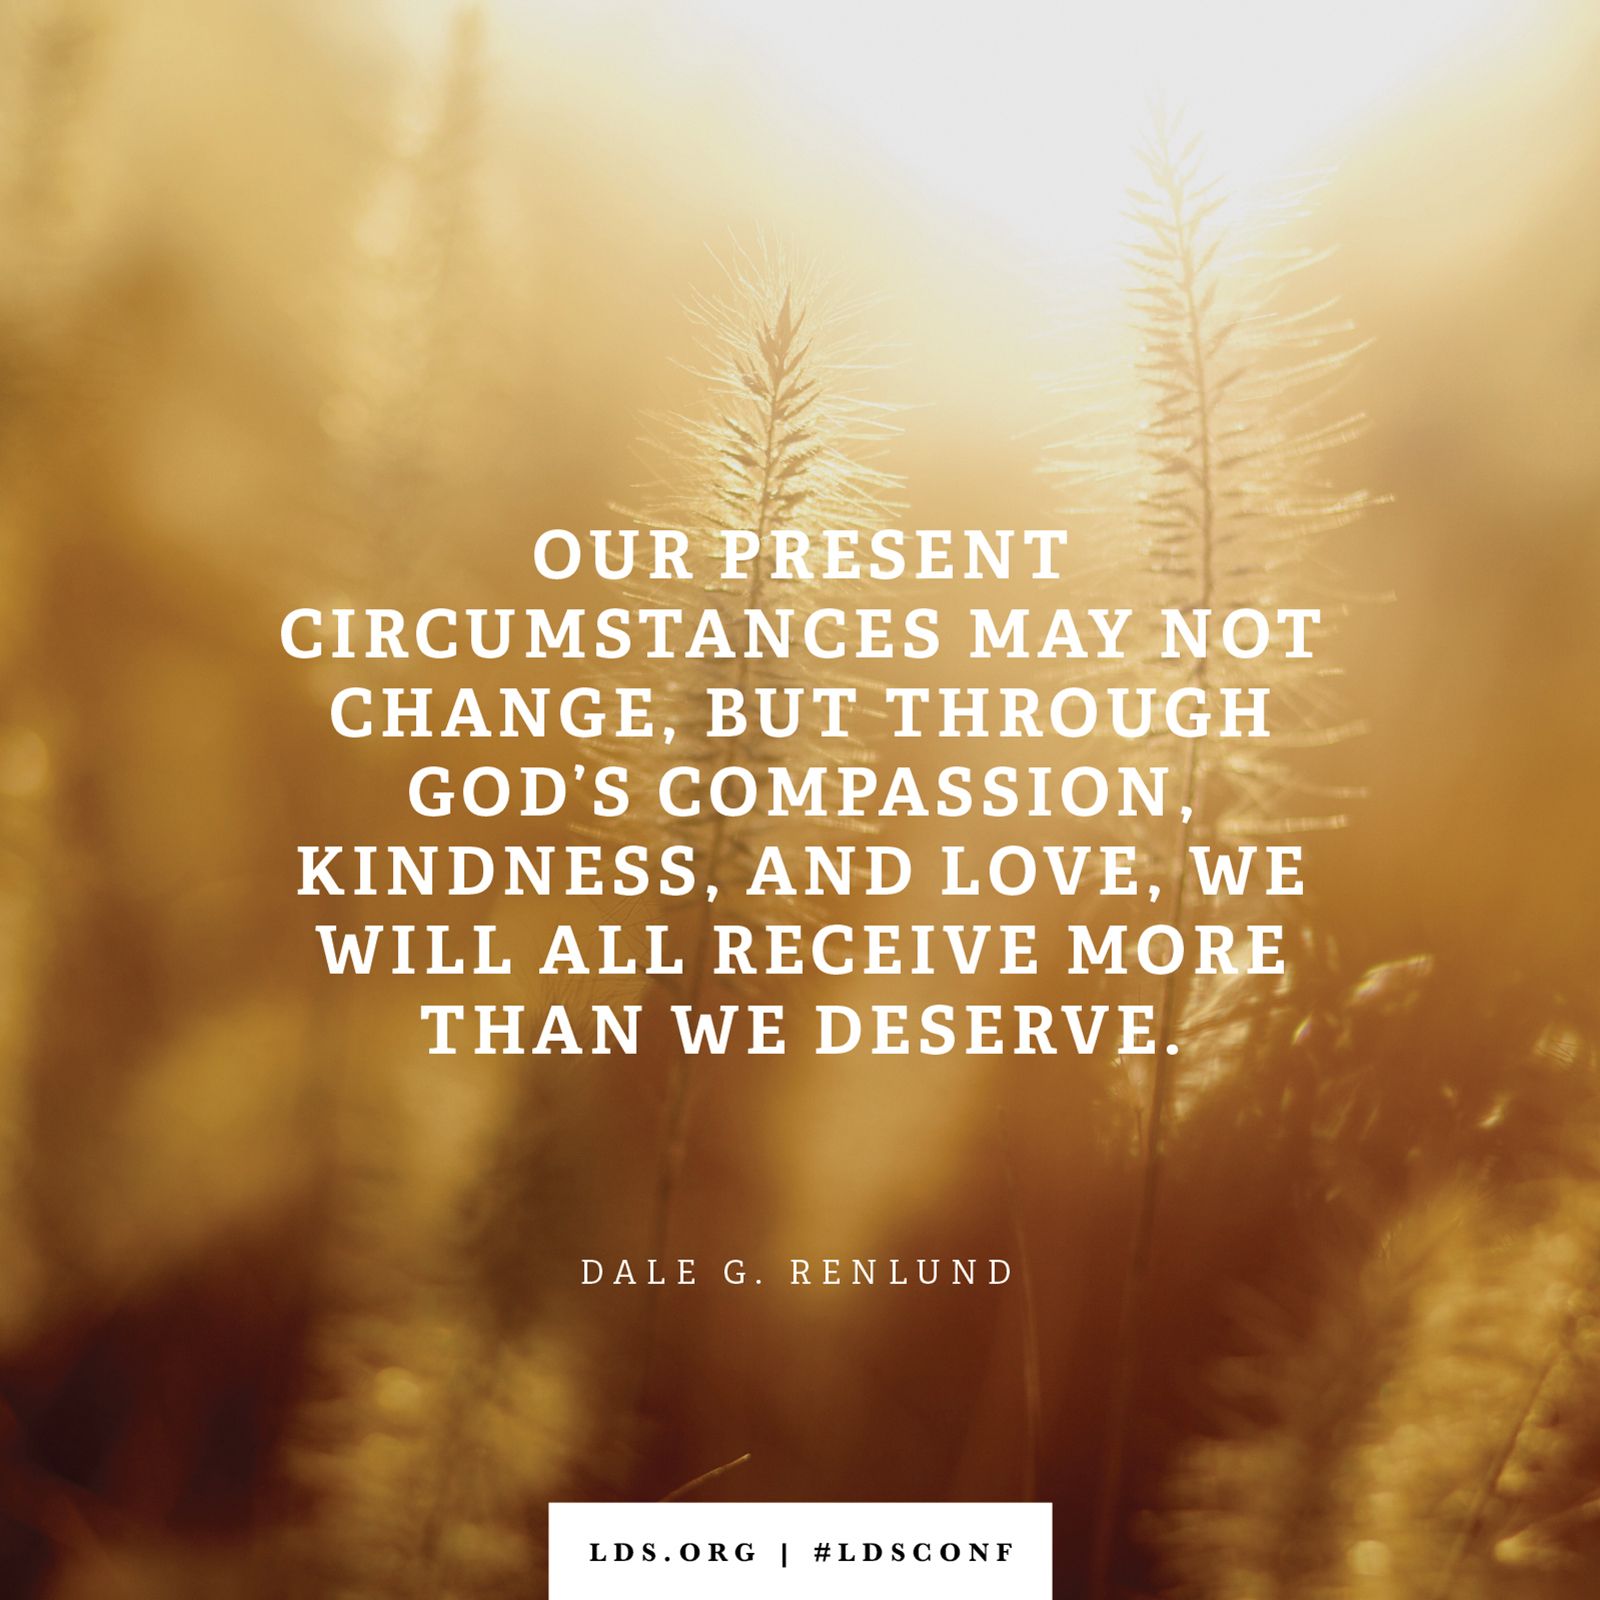 “Our present circumstances may not change, but through God’s compassion, kindness, and love, we will all receive more than we deserve.” —Elder Dale G. Renlund, “That I Might Draw All Men unto Me”